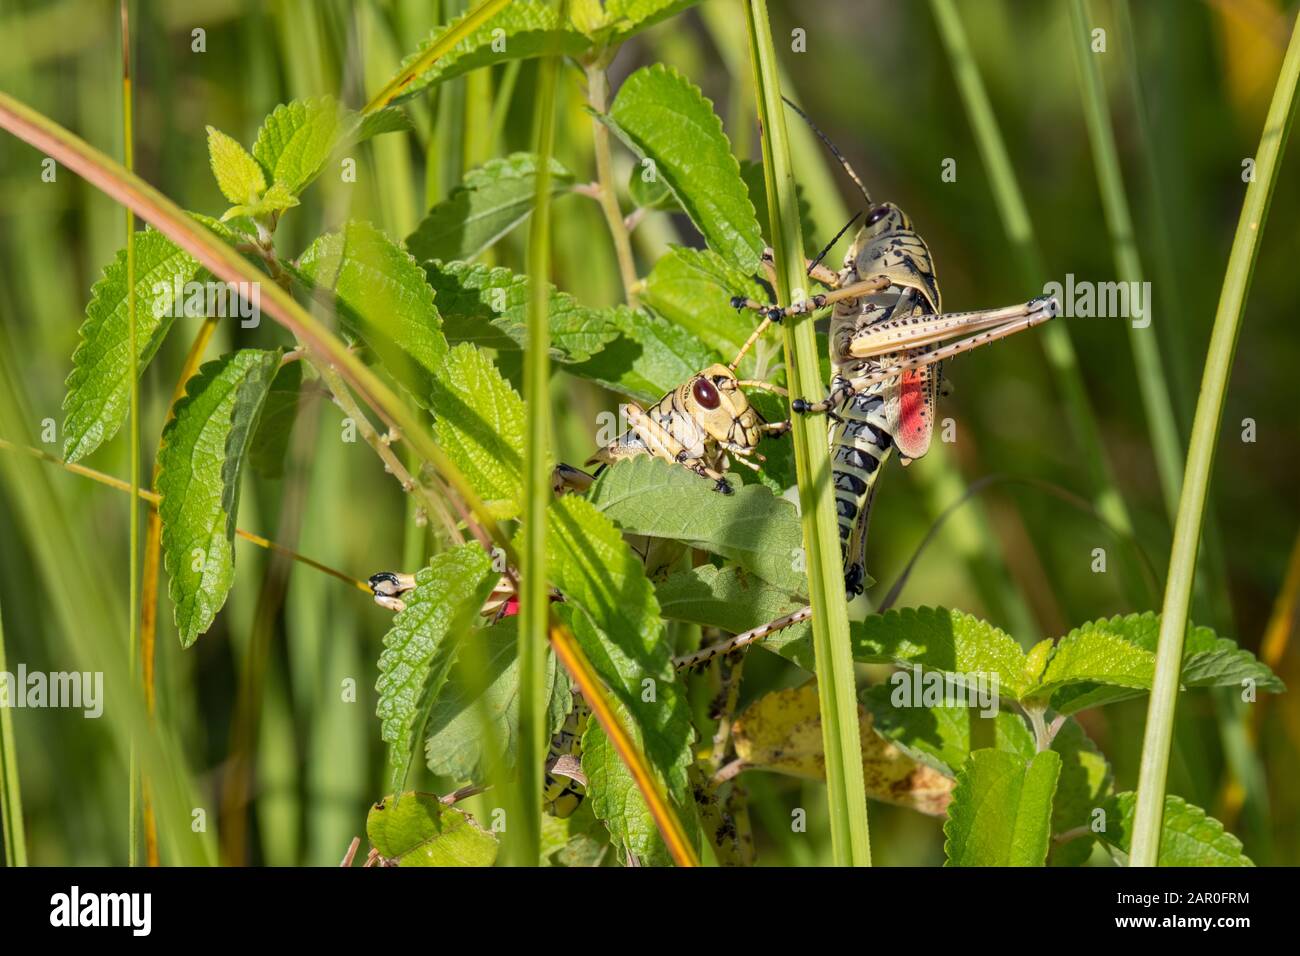 Couple of adult eastern lubber grasshoppers in the Everglades National Park, Florida Stock Photo